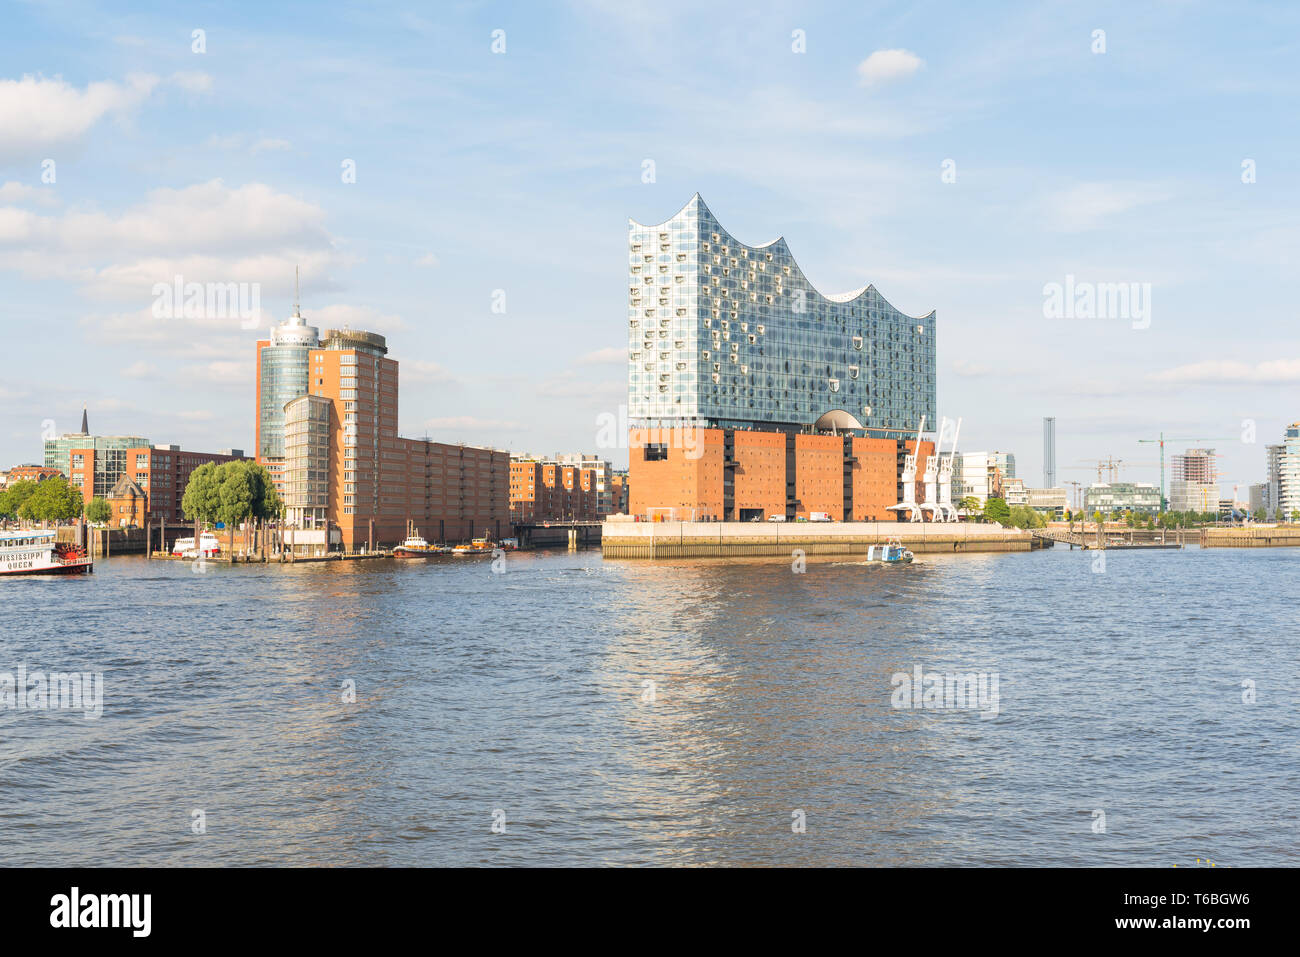 The Elbphilharmonie is the new cultural icon in Hamburg Stock Photo